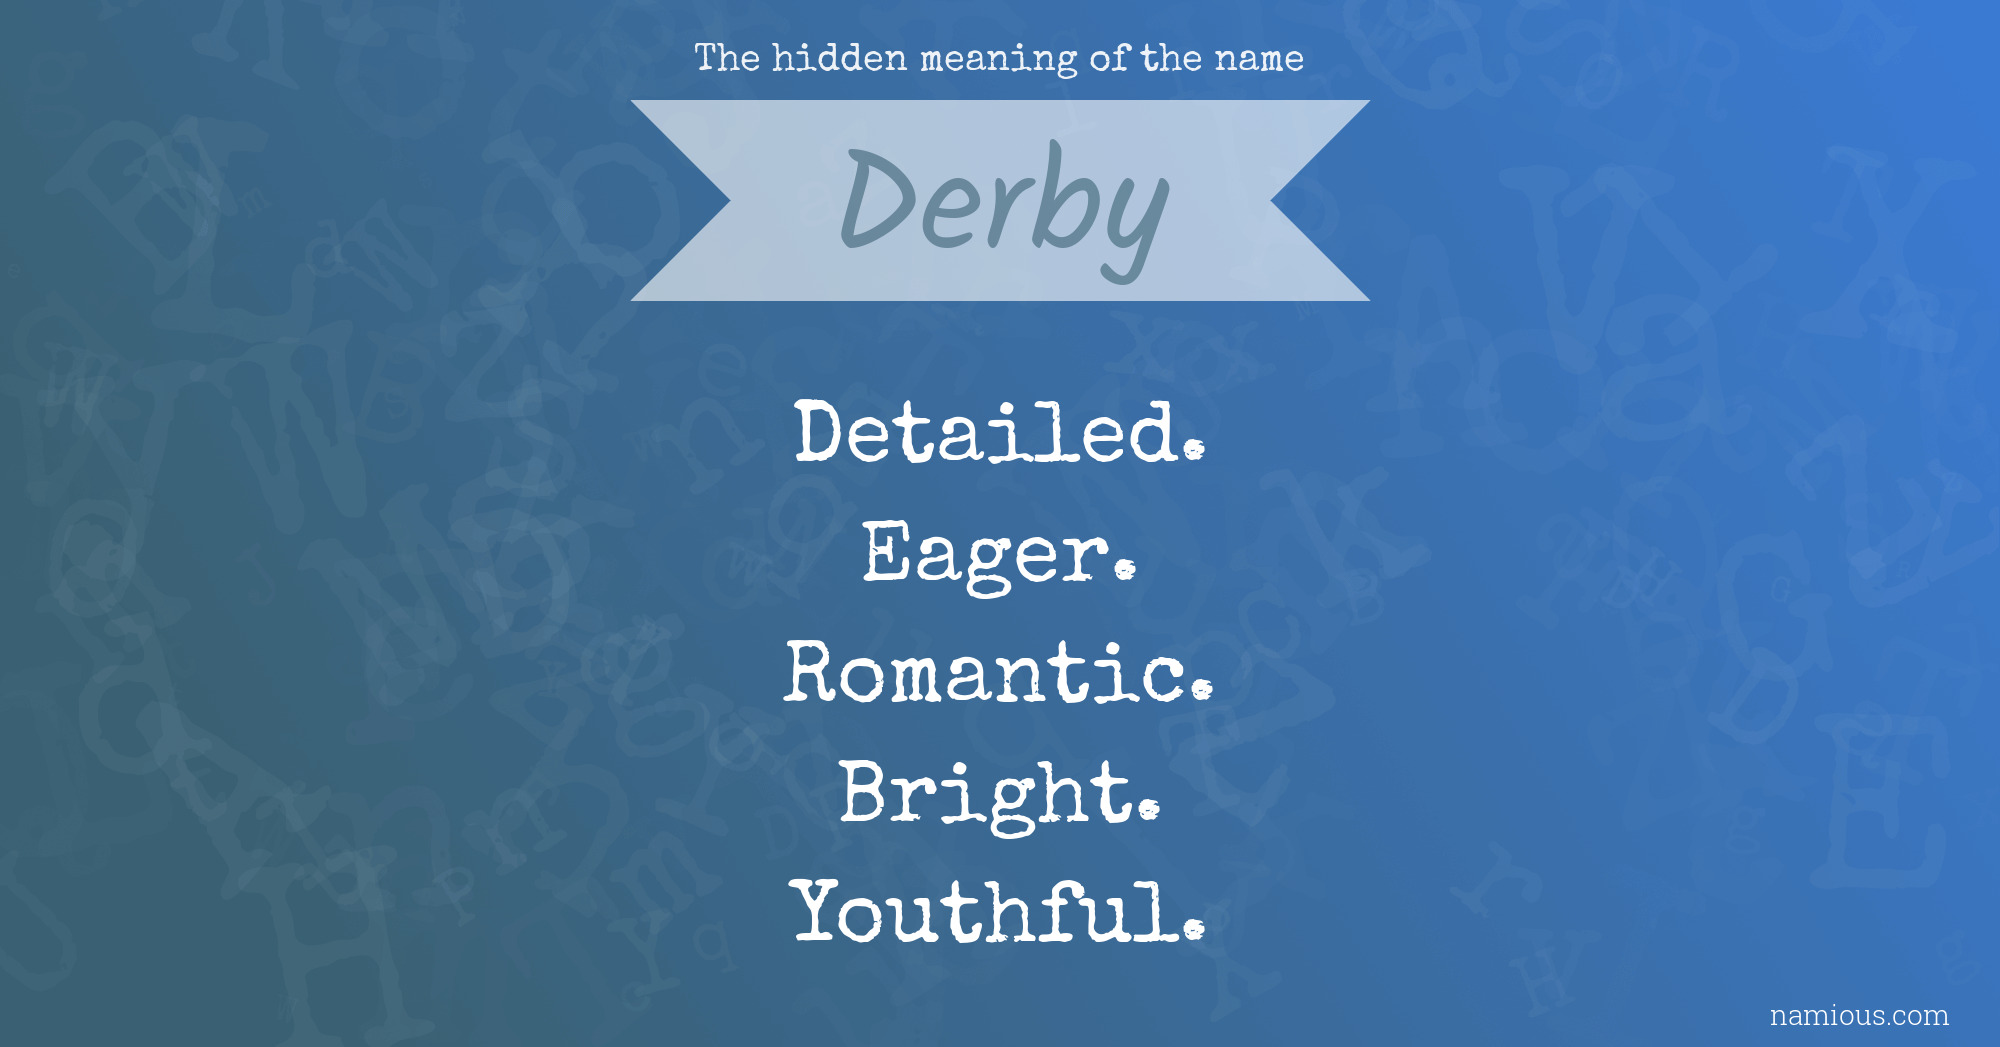 The hidden meaning of the name Derby